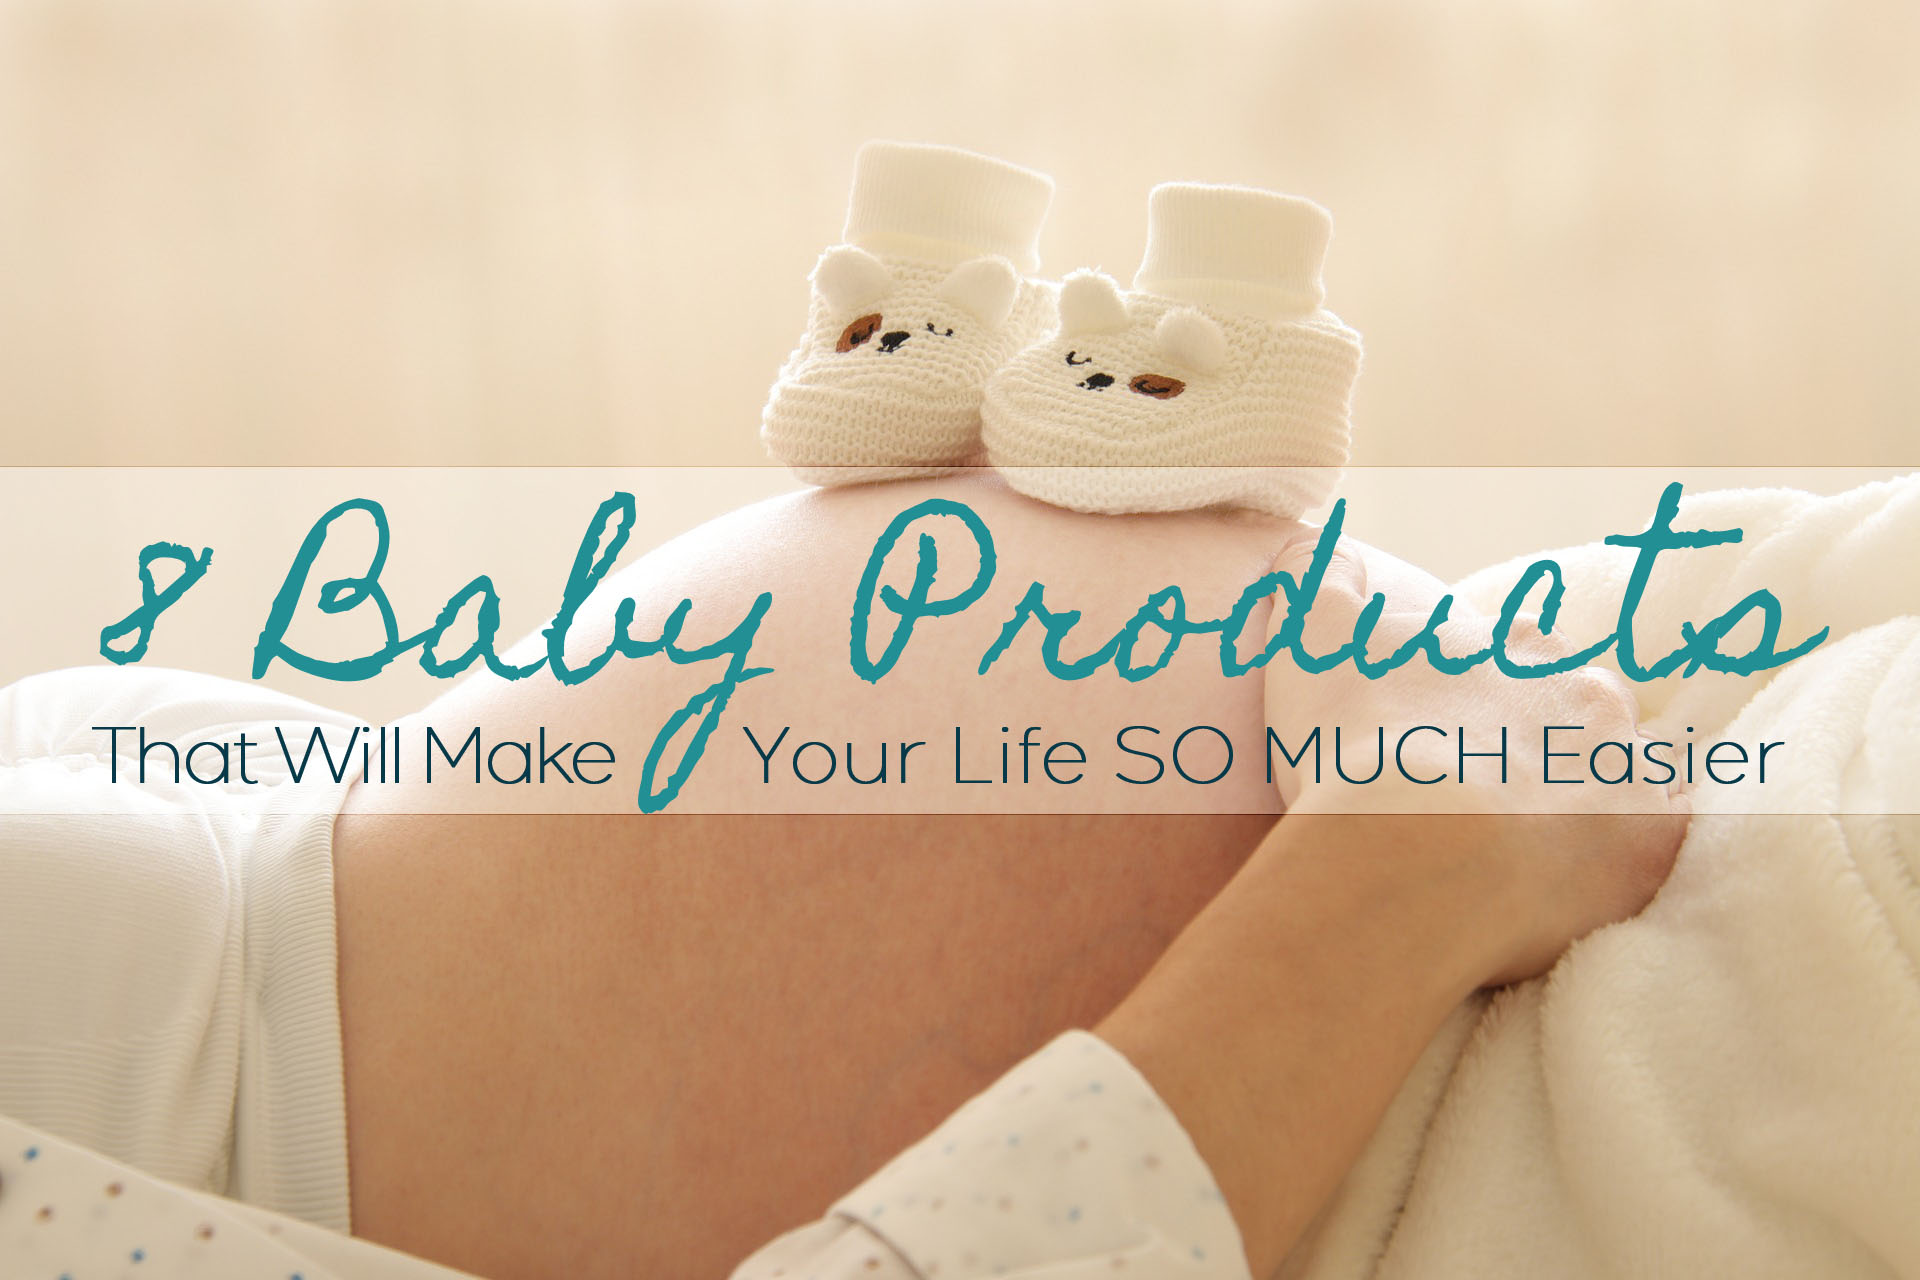 8 Baby Products That Will Make Your Life SO Much Easier